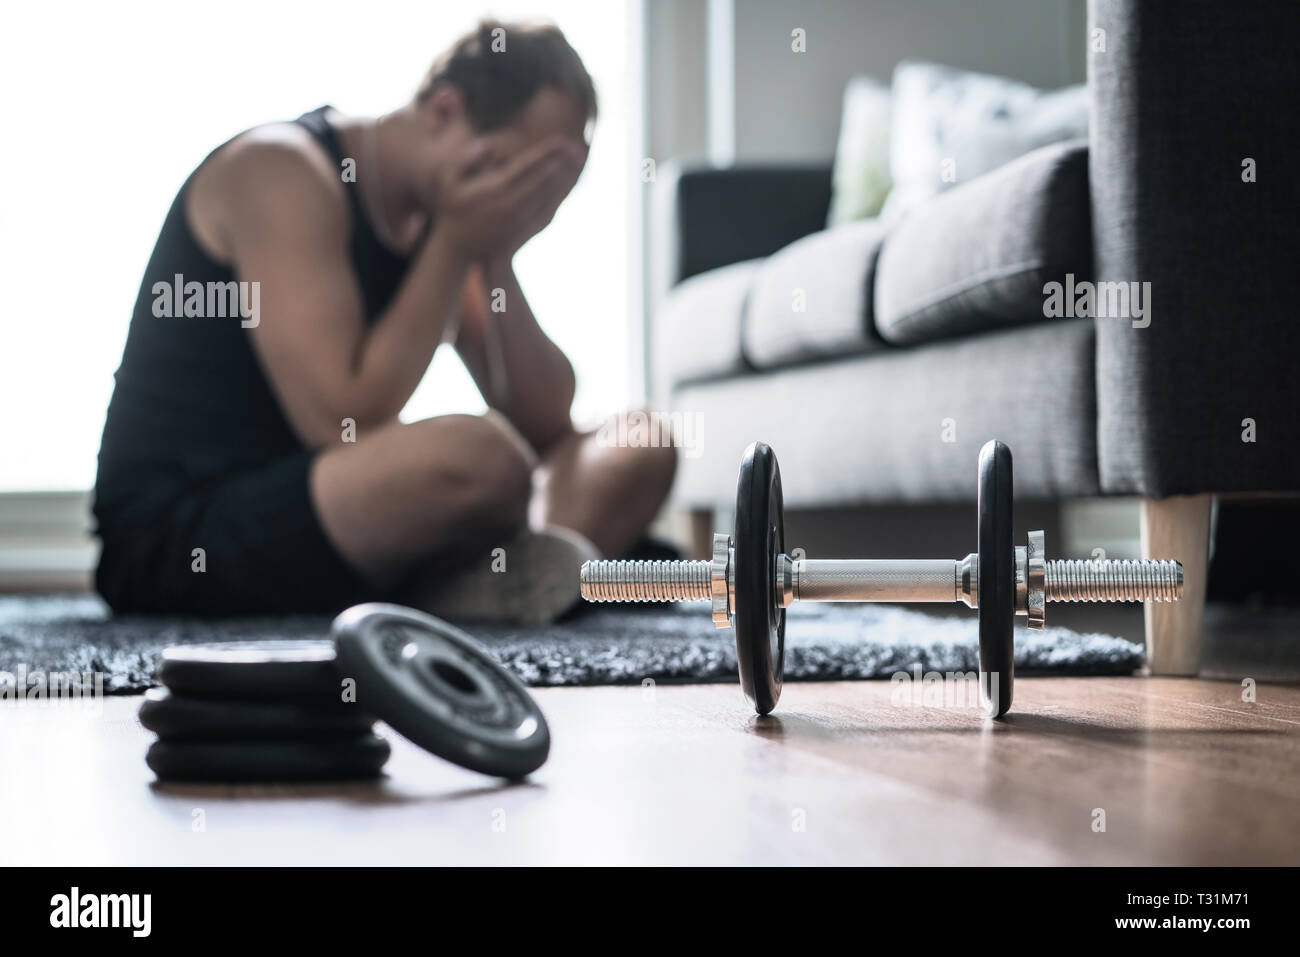 Workout problem, stress in fitness or too much training. Sad or tired man having trouble with overtraining. Exhausted and unhappy athlete. Stock Photo